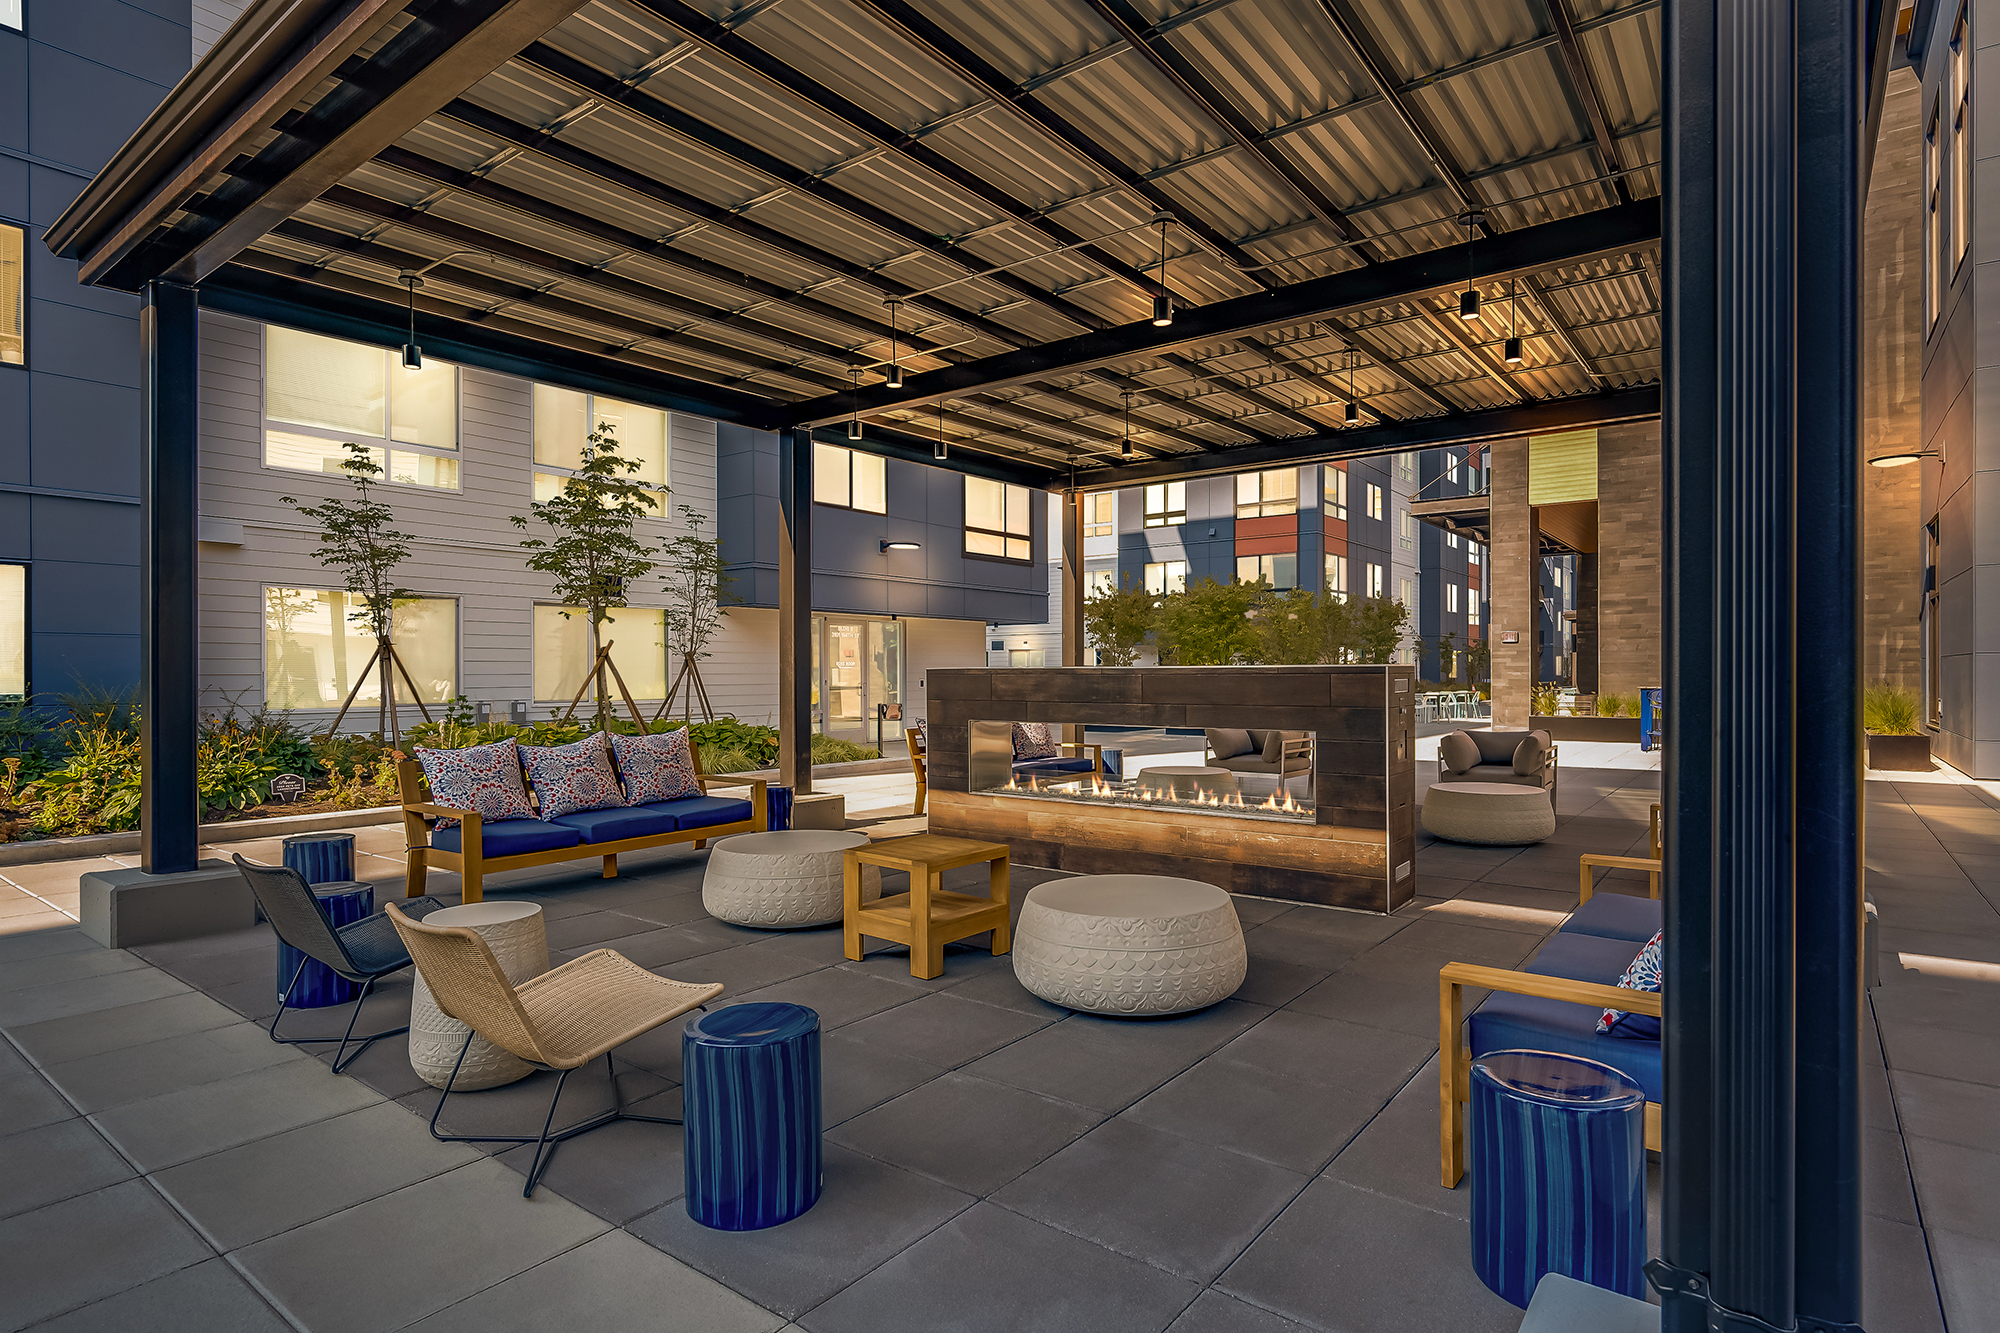 Apartment building outdoor lounge area with a fire pit at The Woods at Alderwood in Lynnwood, WA.